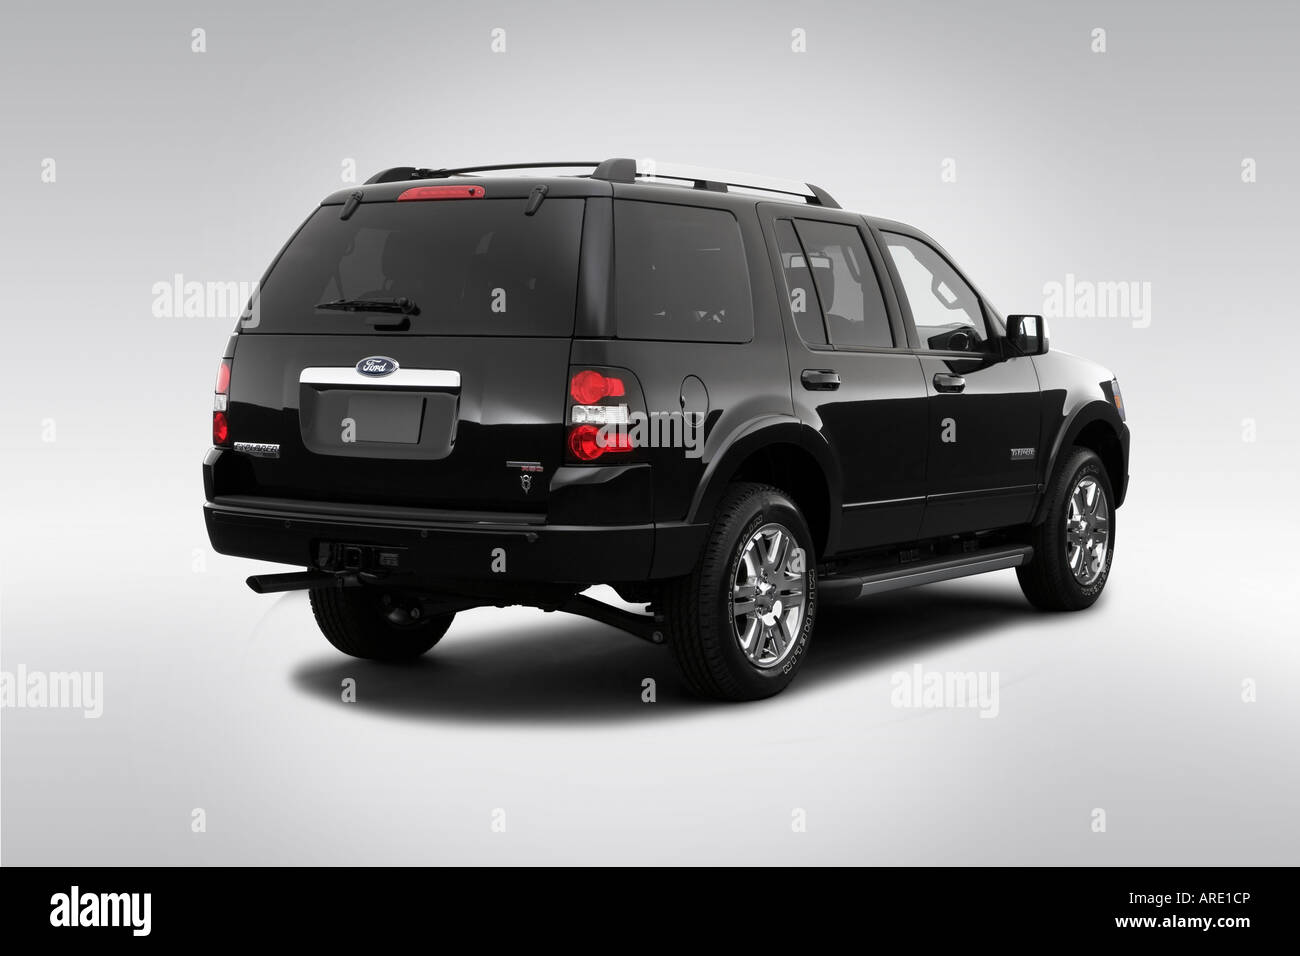 2006 Ford Explorer Limited in Black - Rear angle view Stock Photo - Alamy